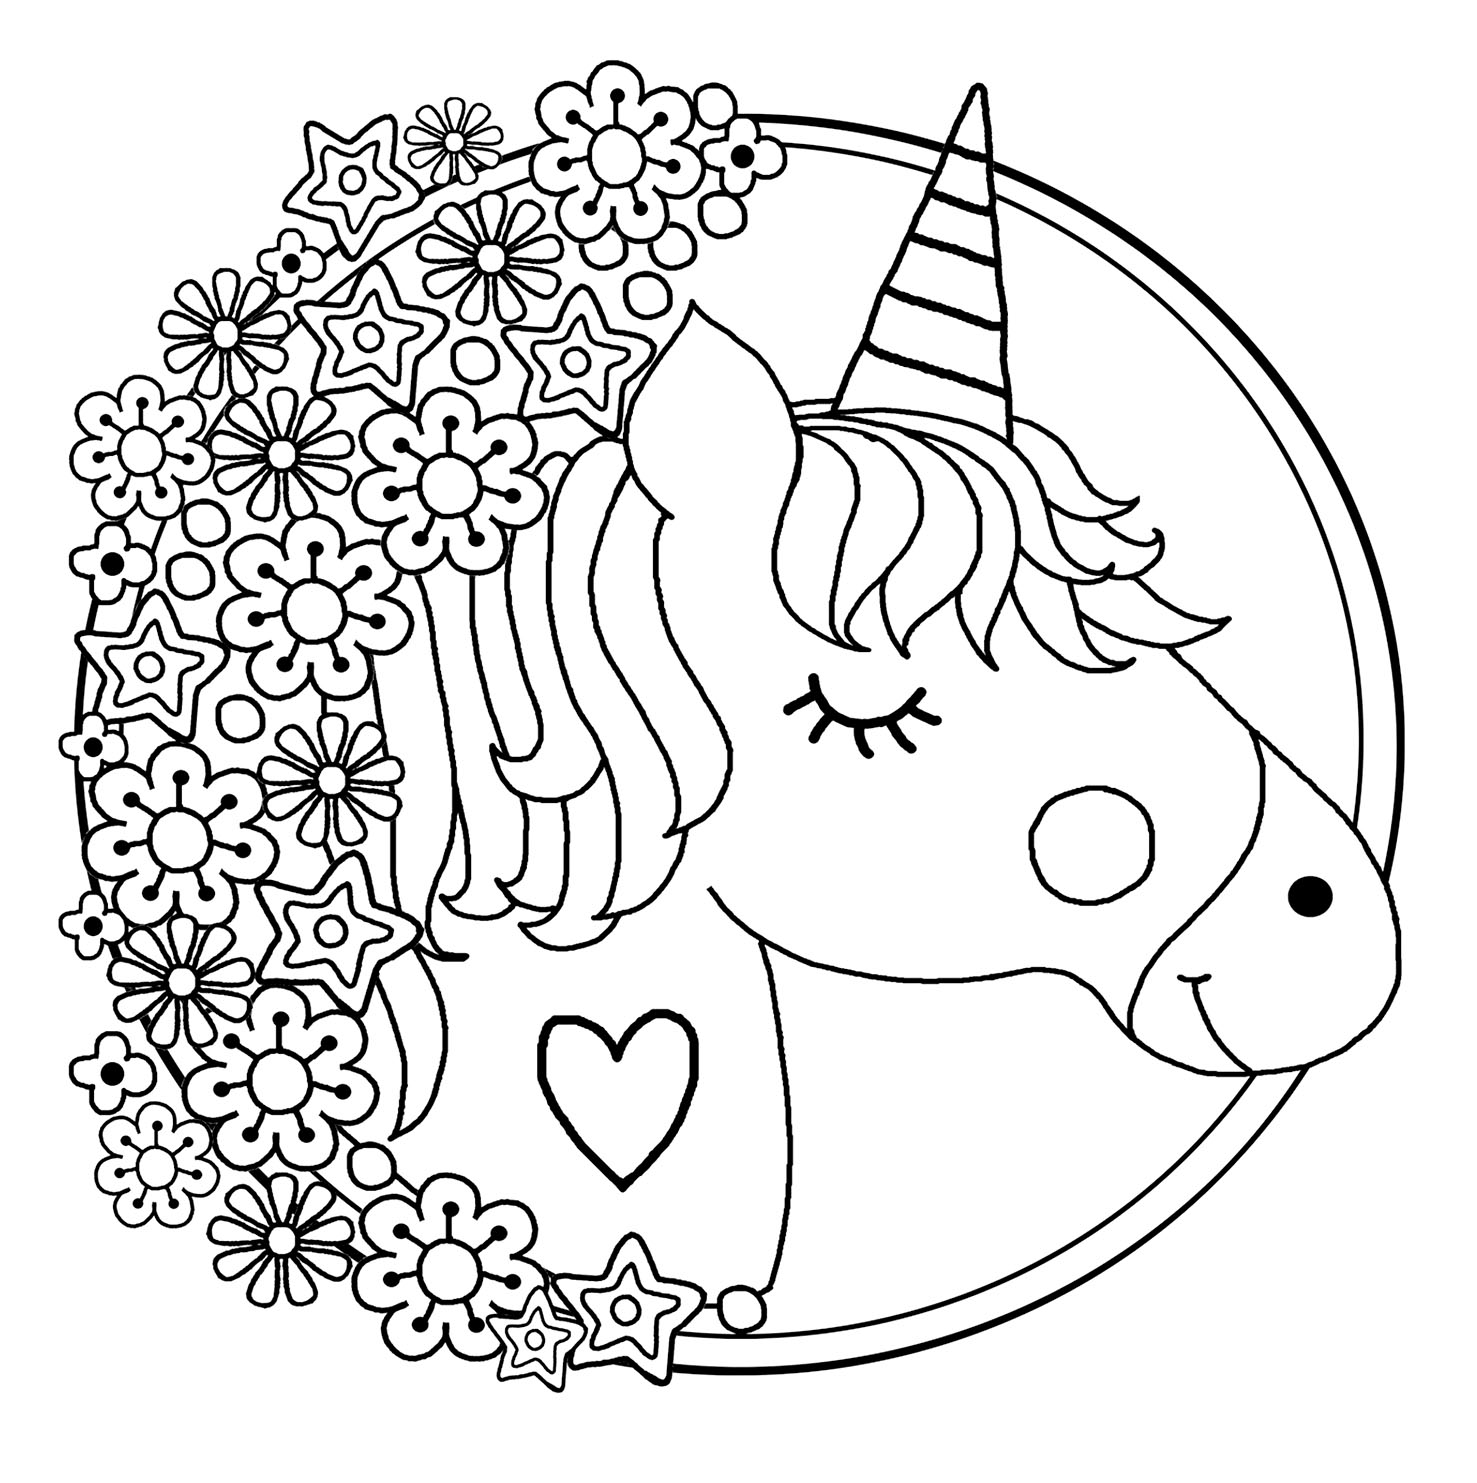 unicorn-coloring-pages-for-kids-unicorns-kids-coloring-pages